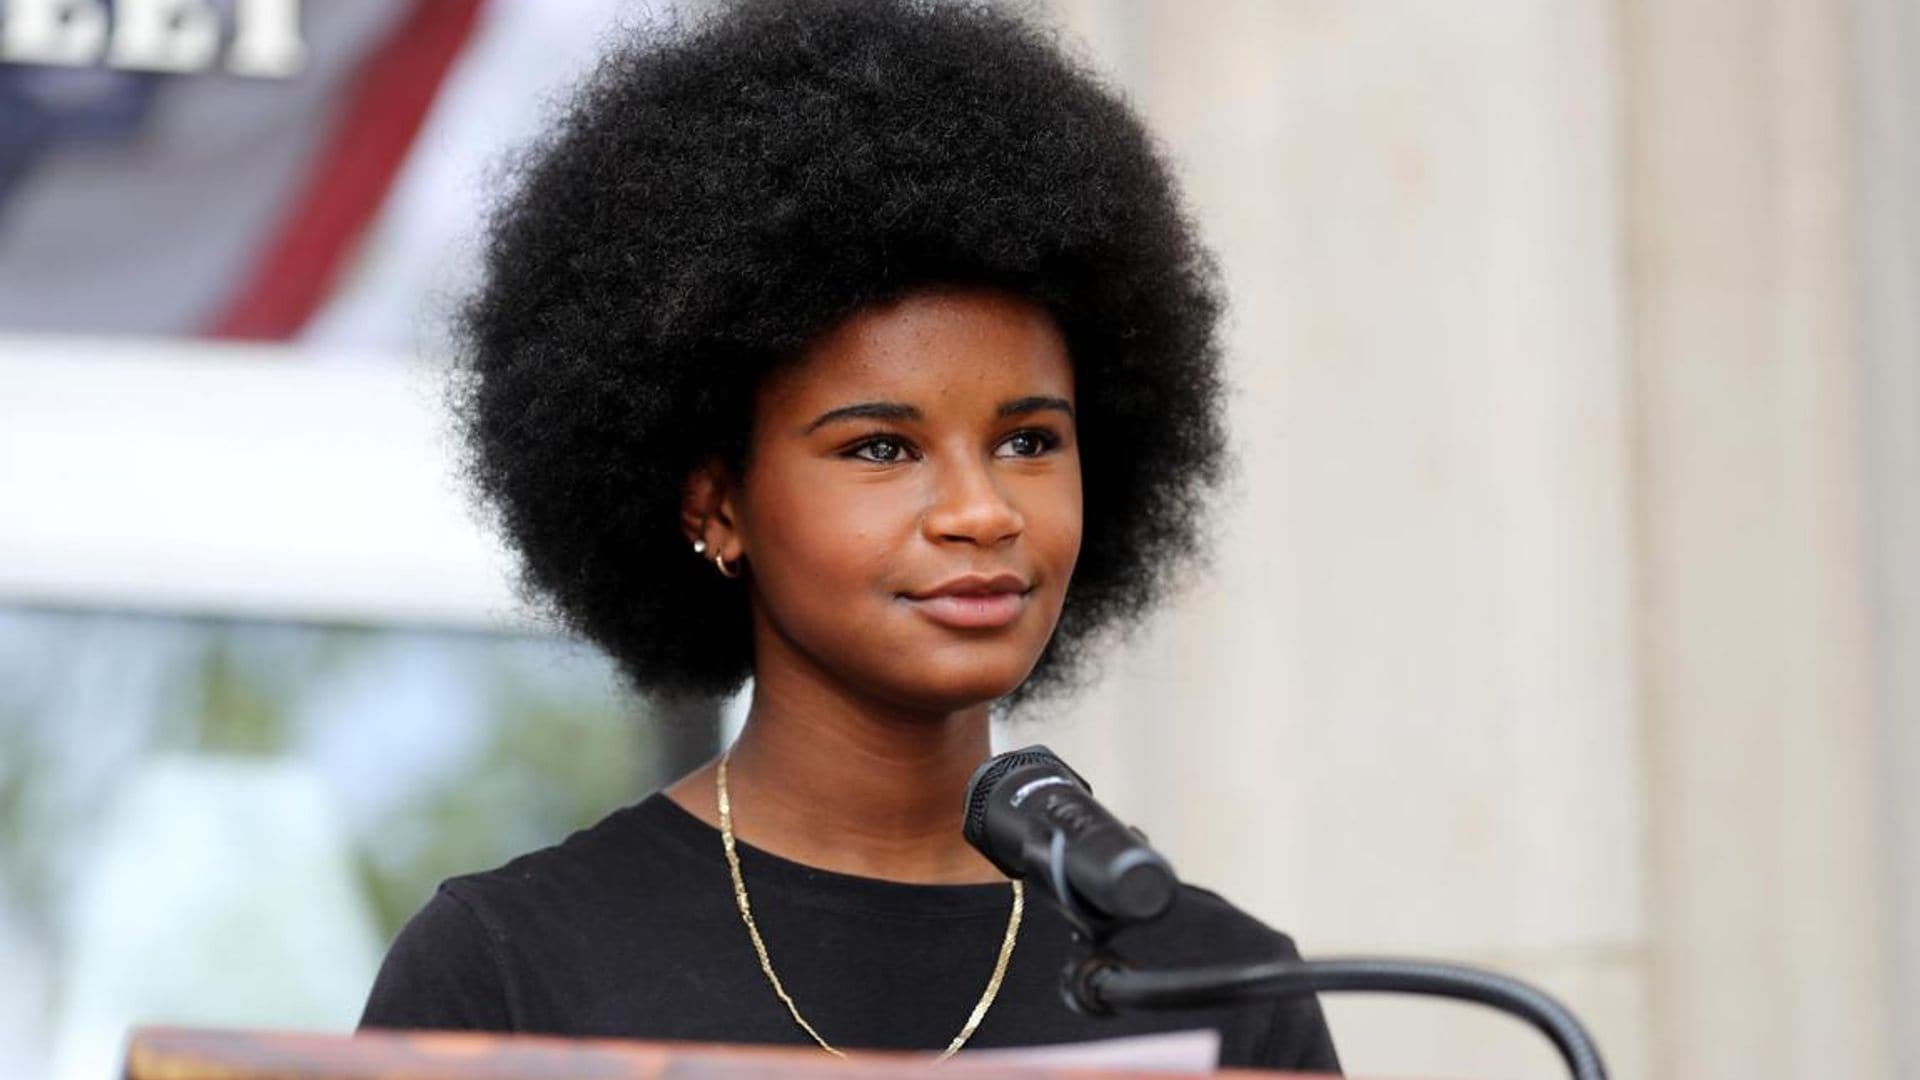 An exclusive interview with Marley Dias: 15 year old activist, author, and executive producer